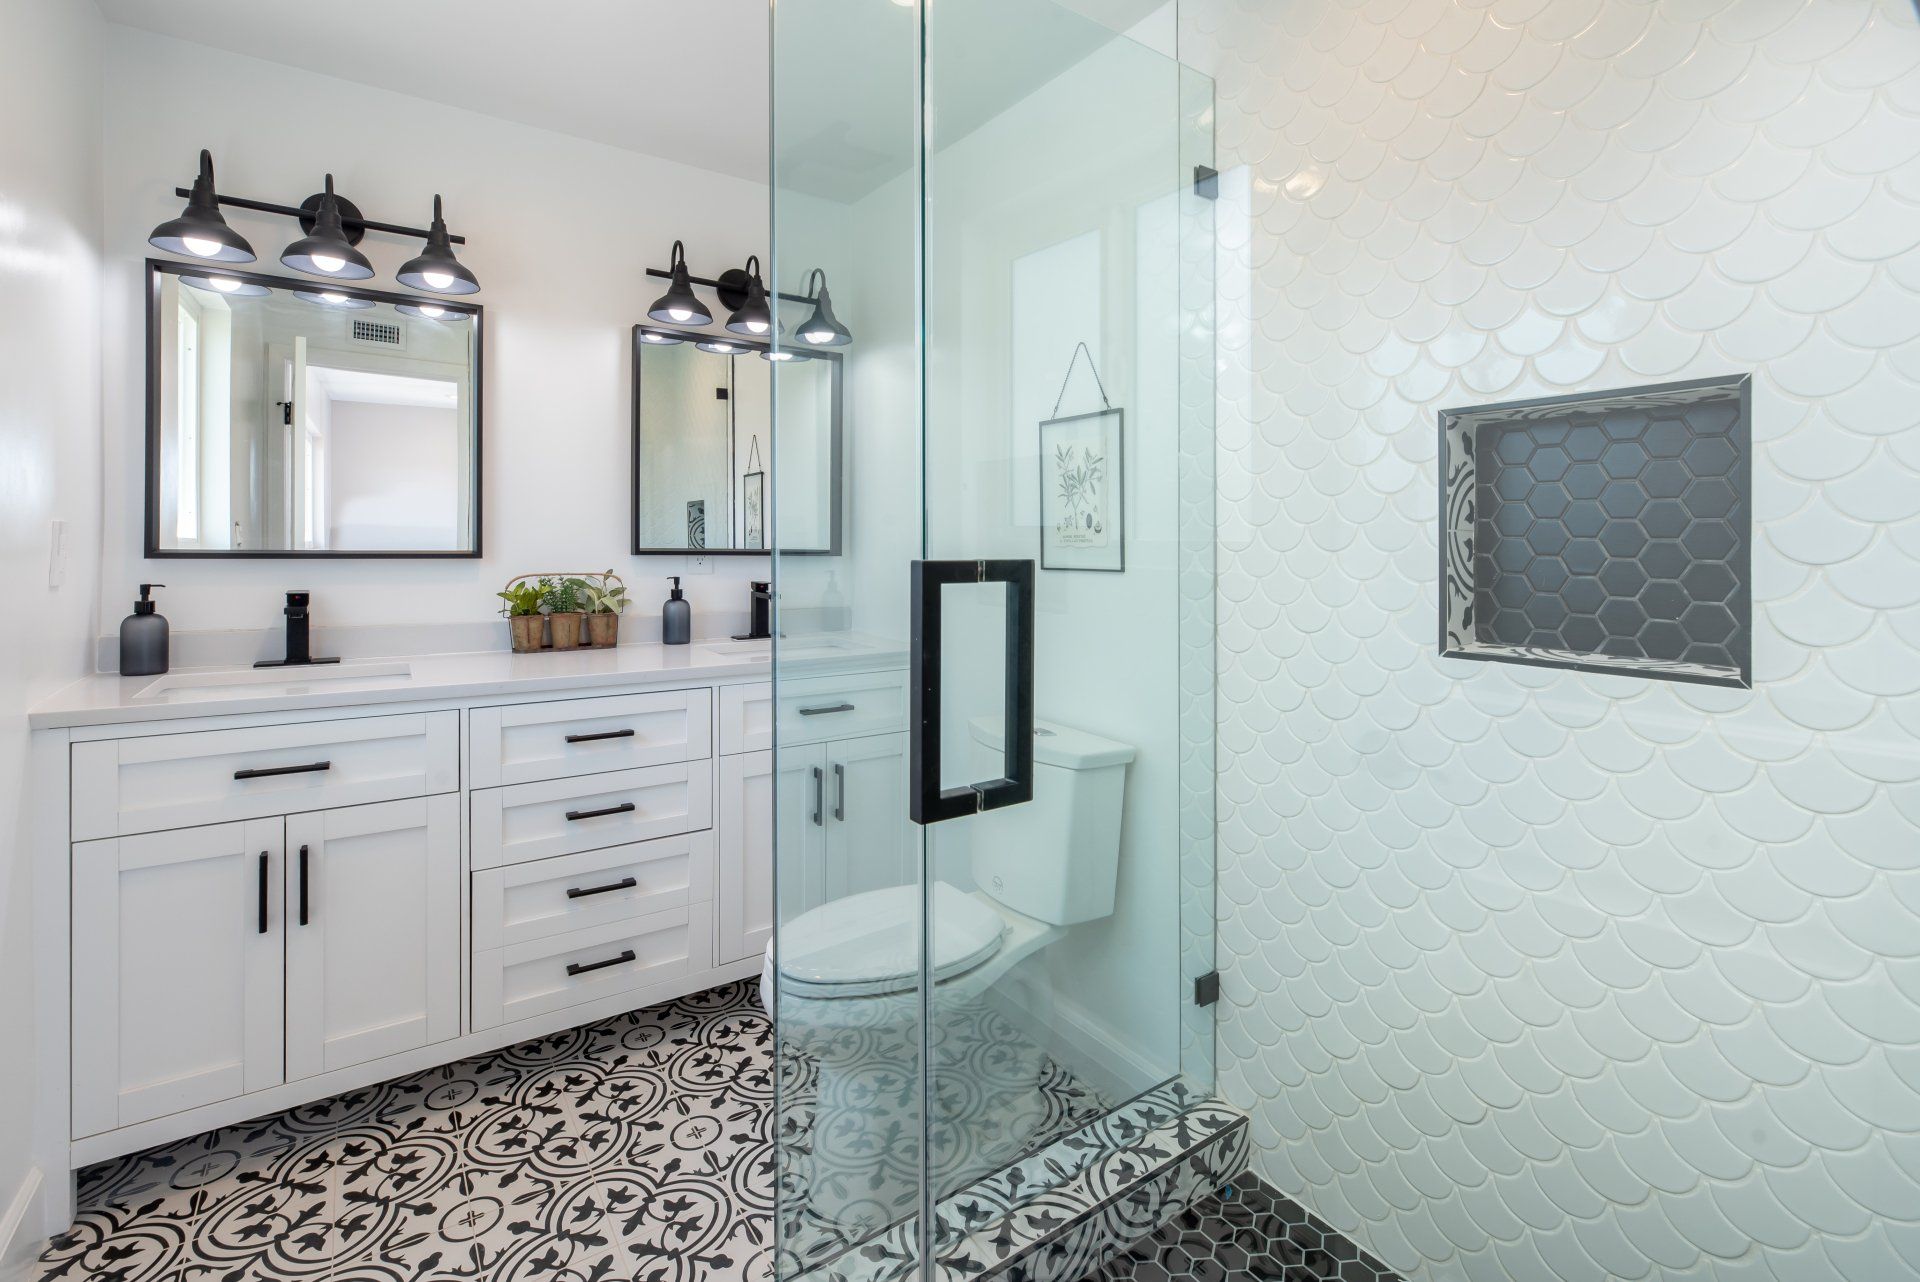 Newly renovated bathroom with modern black and white tiles and white interior design